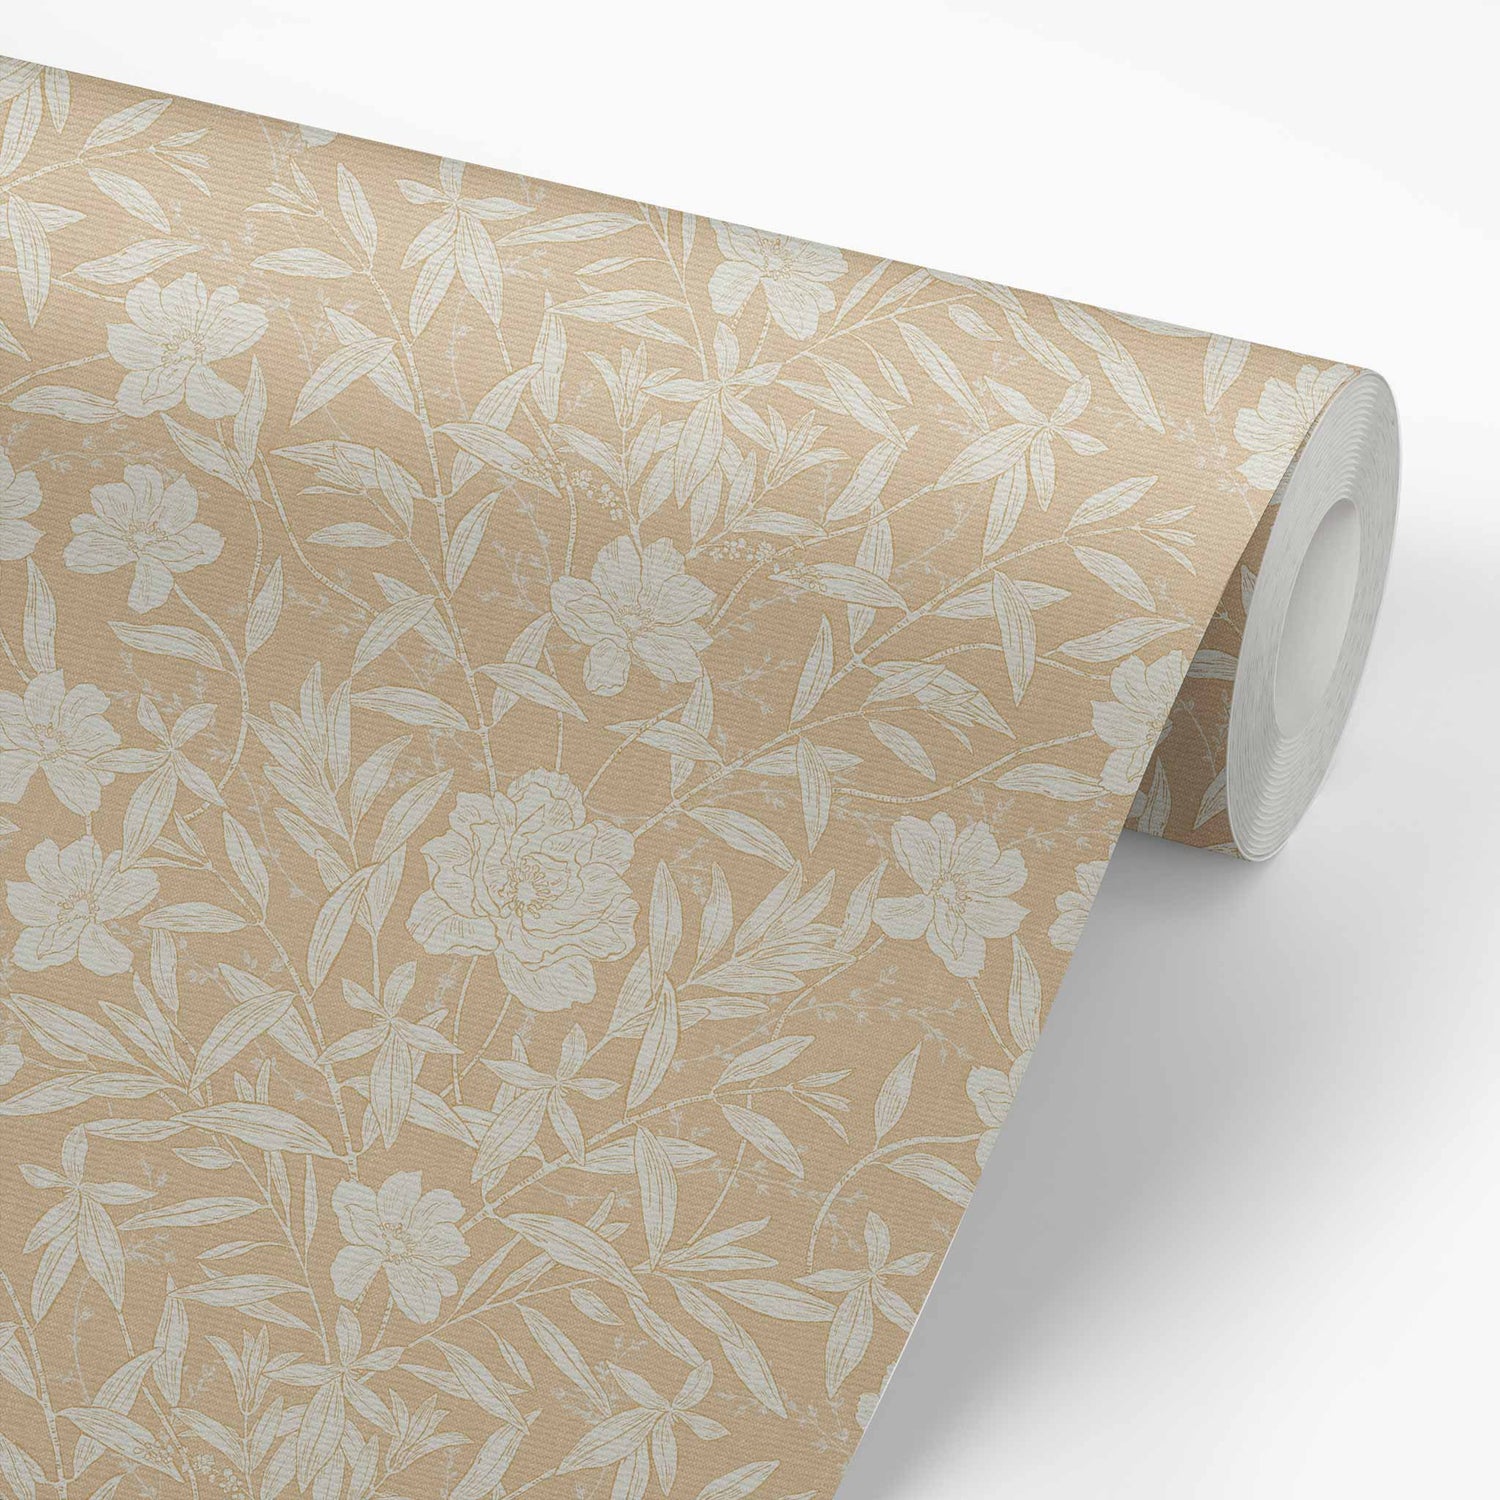 Our luxurious Peony Garden Wallpaper in Tan adds a majestic touch of sophistication to any space. Its distinctive classic peonies are guaranteed to add a sense of elegance to any wall. 